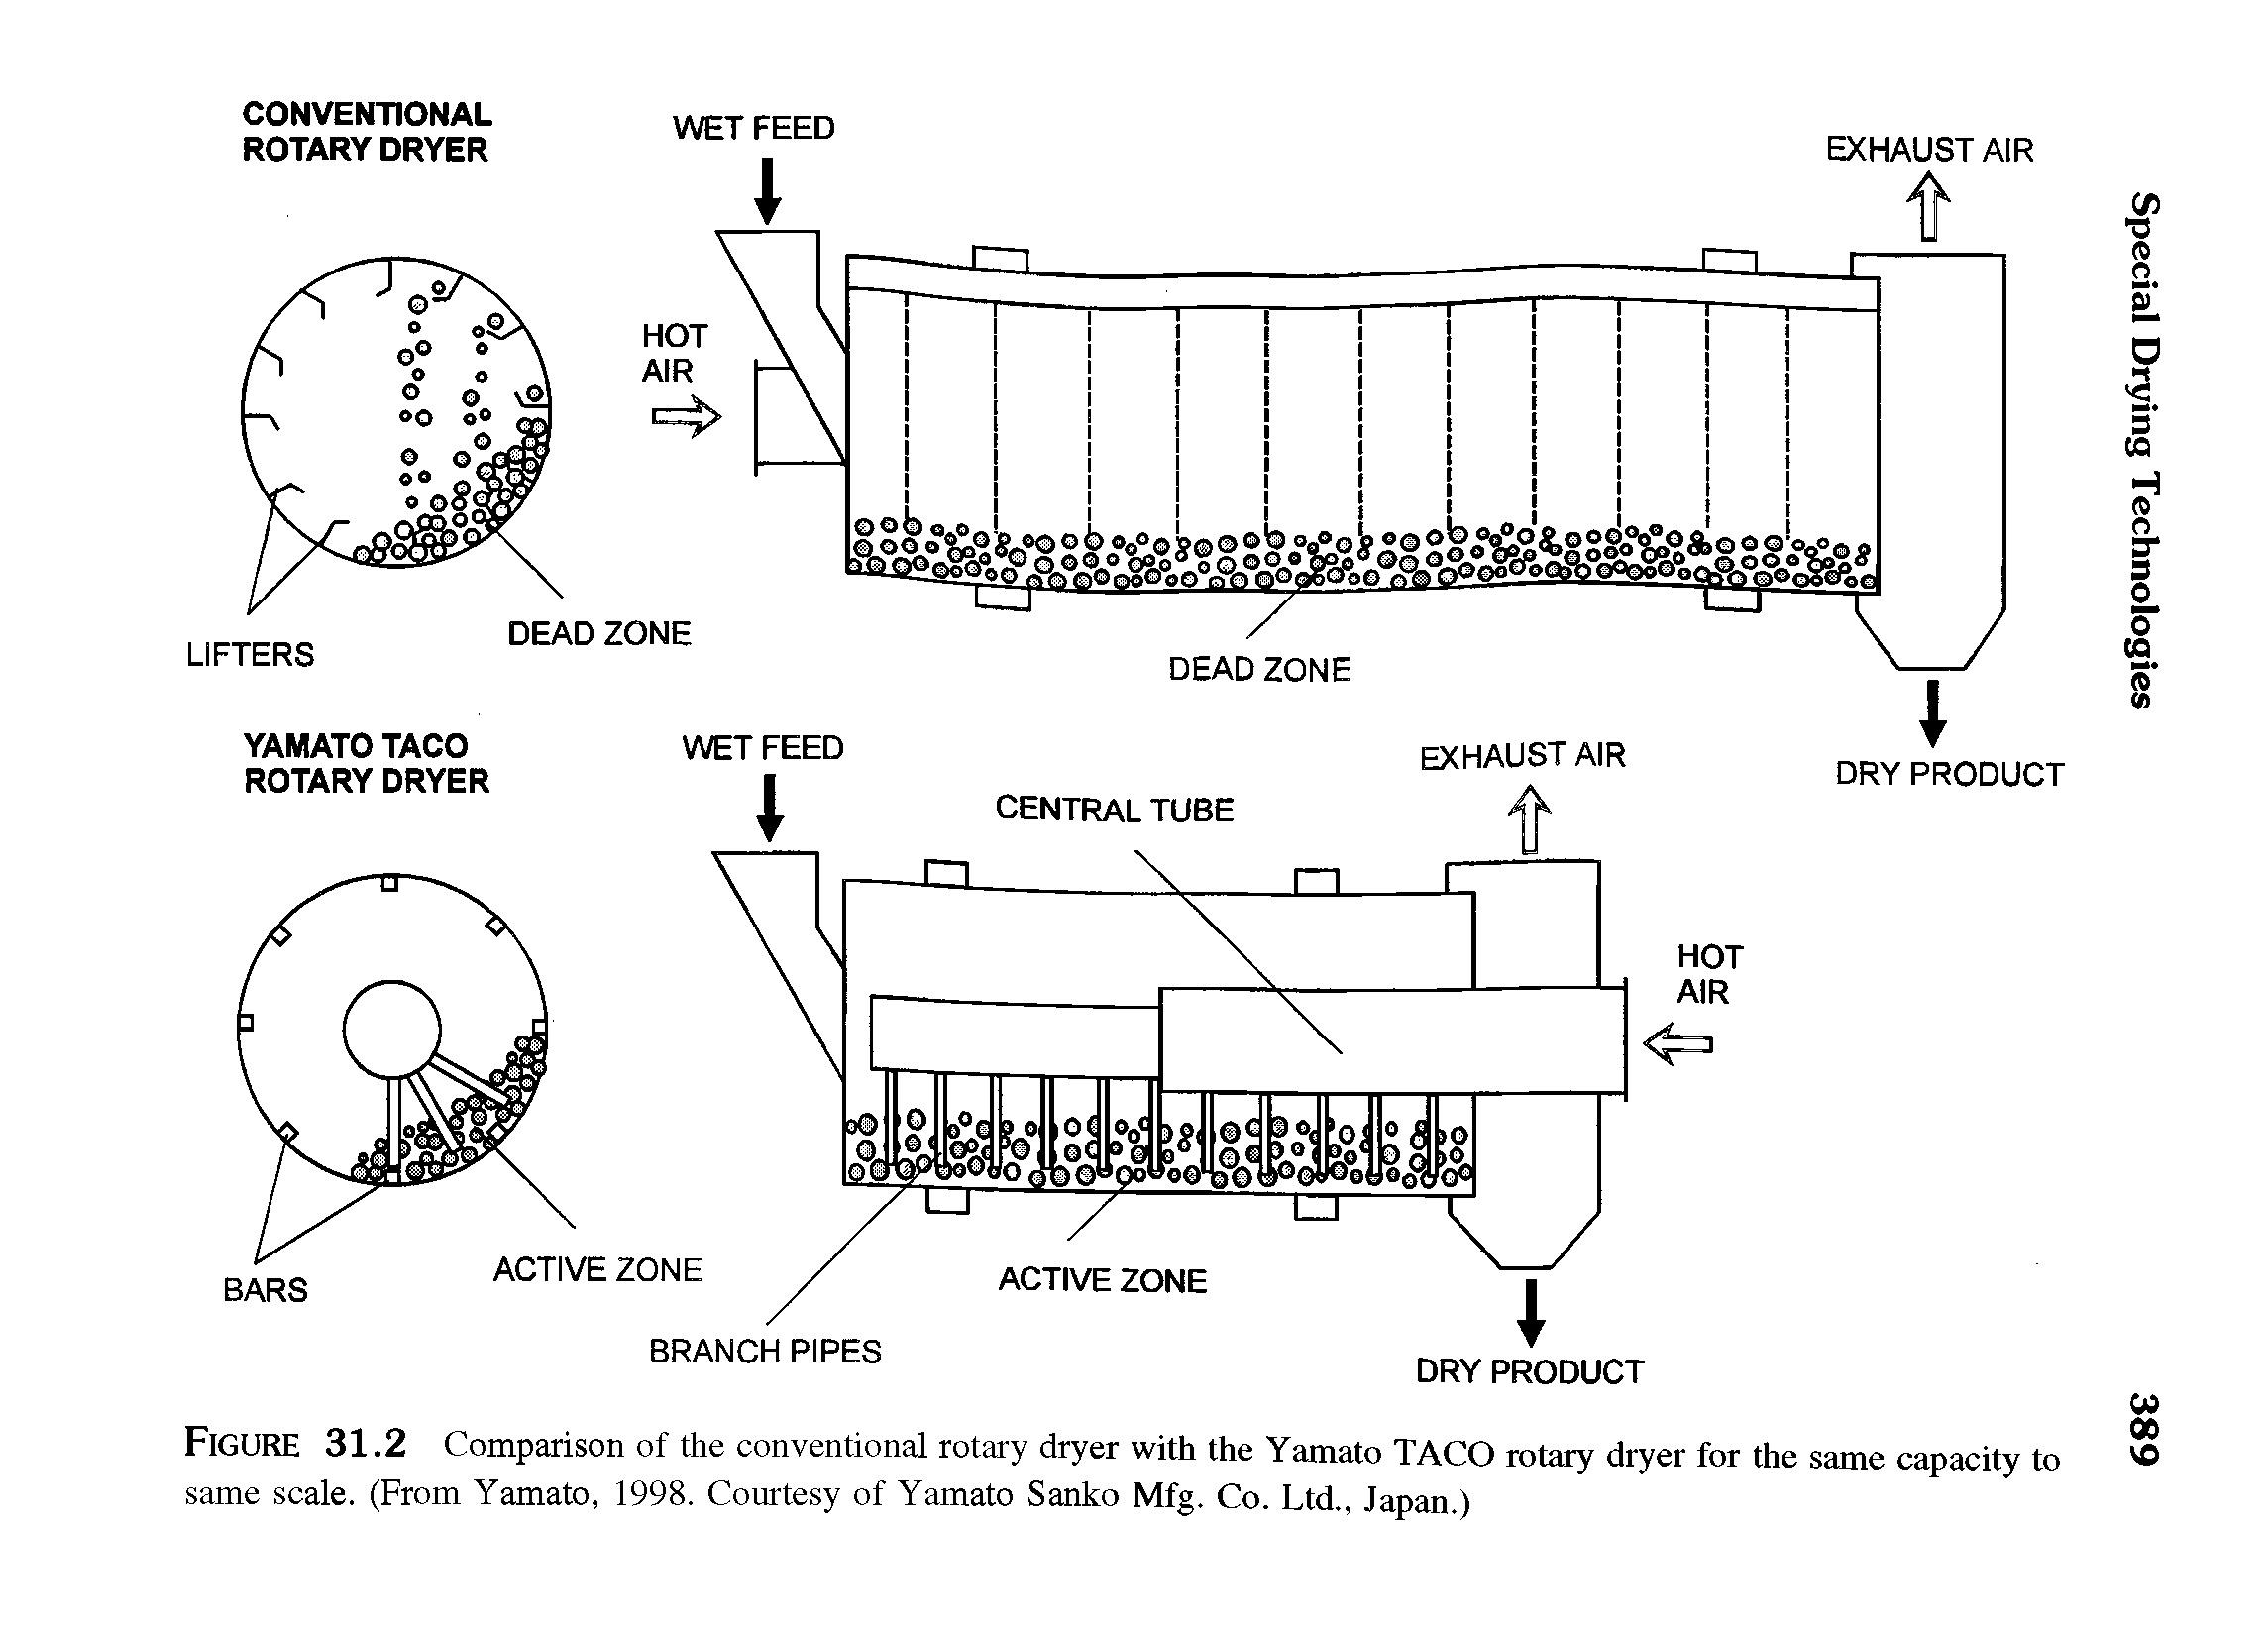 Figure 31.2 Comparison of the conventional rotary dryer with the Yamato TACO rotary dryer for the same capacity to same scale. (From Yamato, 1998. Courtesy of Yamato Sanko Mfg. Co. Ltd., Japan.)...